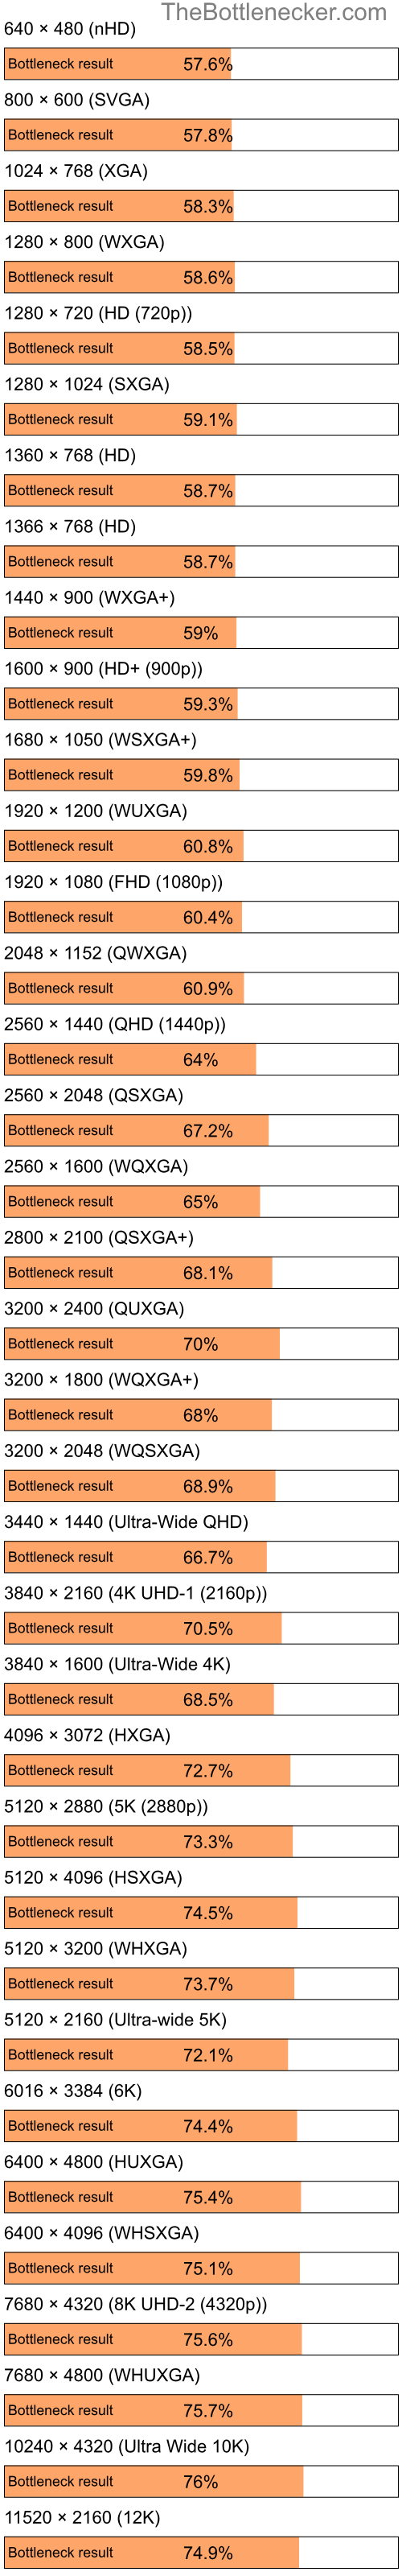 Bottleneck results by resolution for Intel Pentium 4 and NVIDIA GeForce 6600 in Processor Intense Tasks